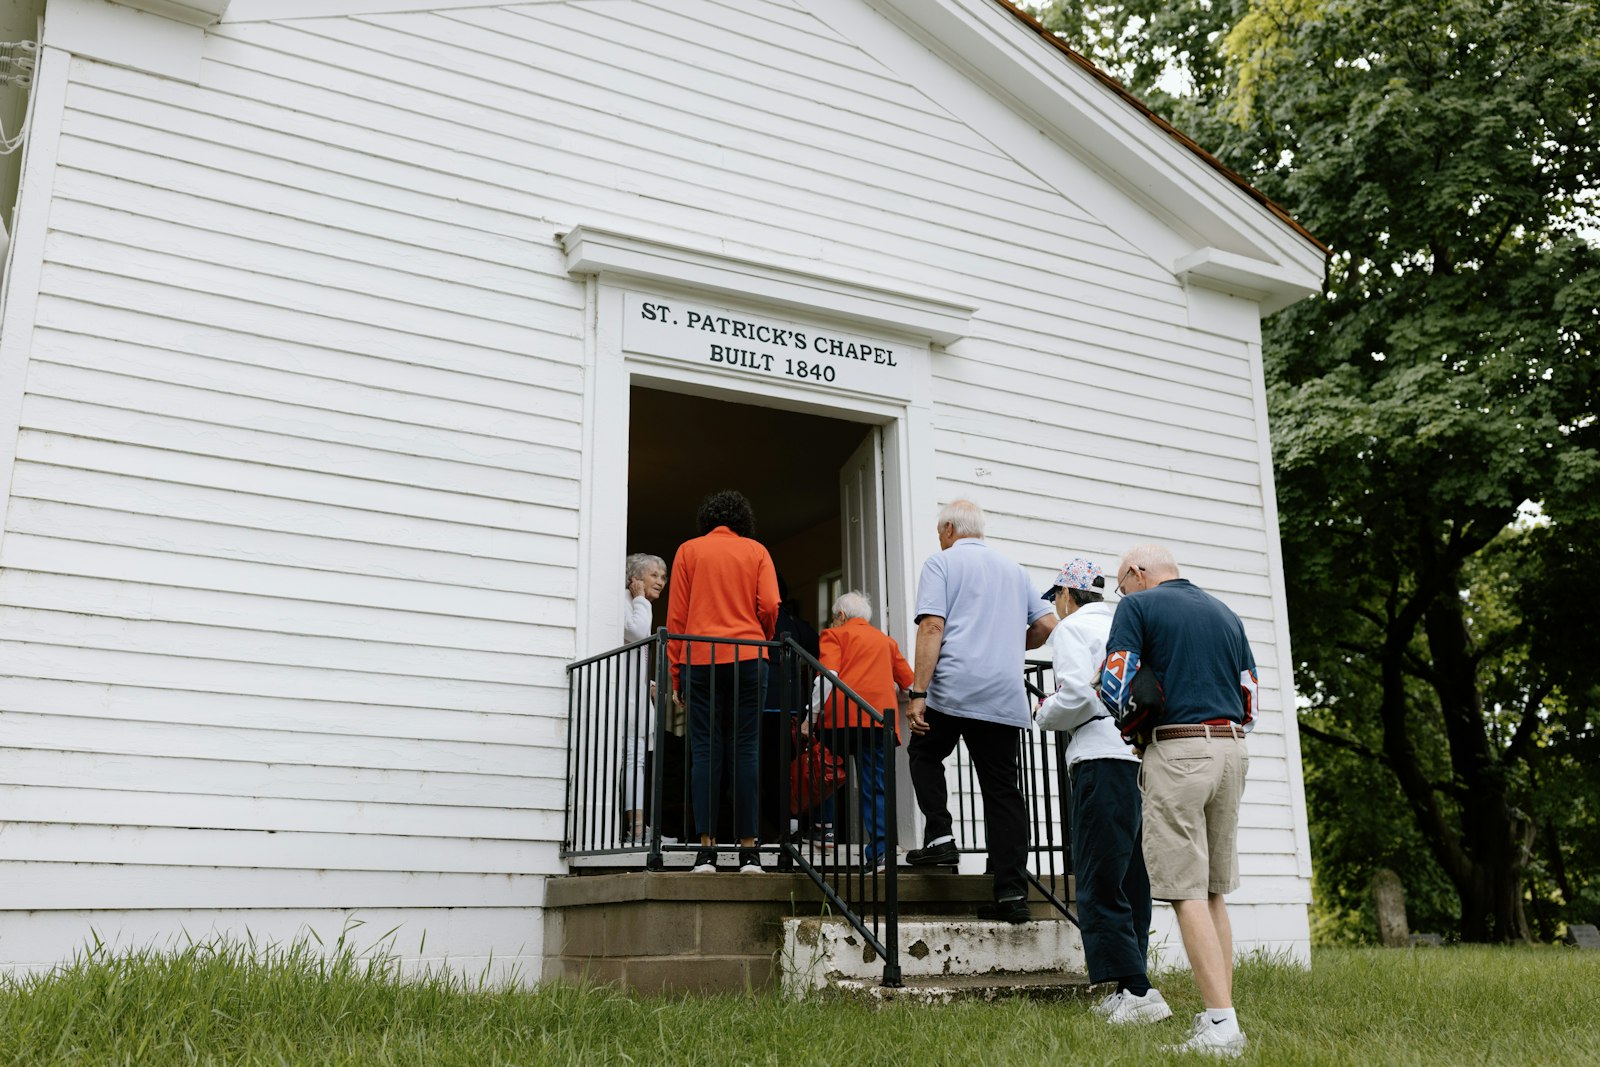 The original clapboard siding, while humble in appearance, is a testament to the chapel's withstanding the test of time. The parish's Knights of Columbus maintain the historic structure.